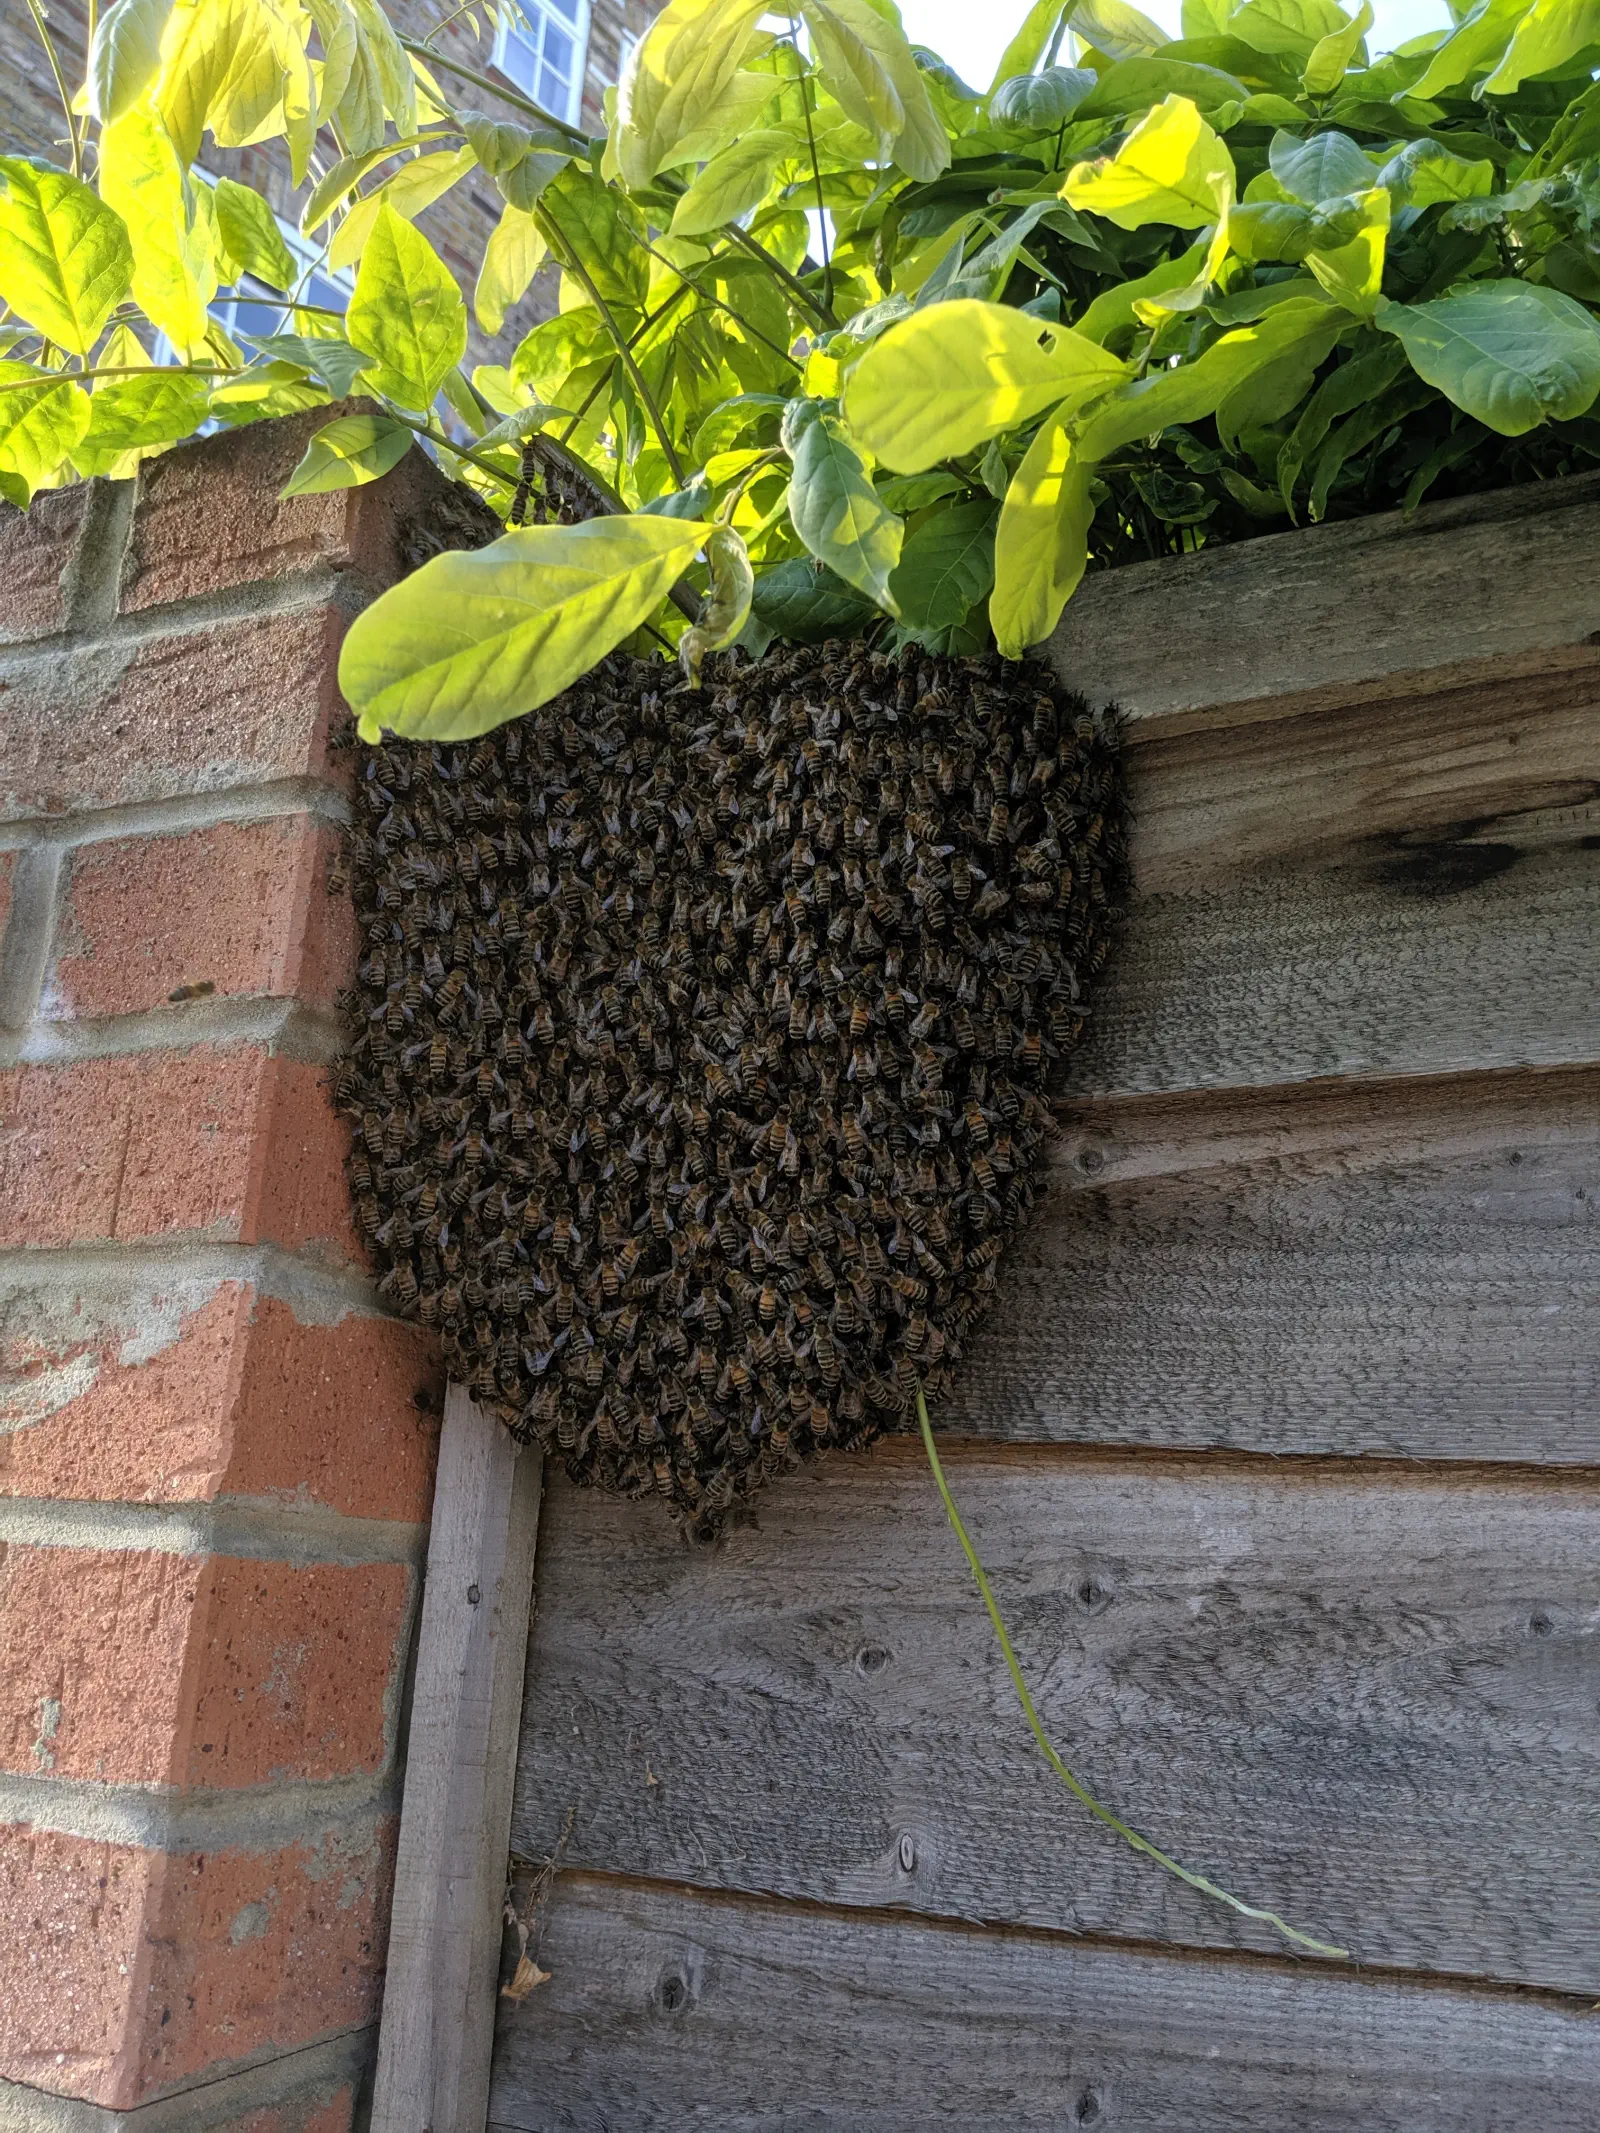 A swarm of honeybees clumped together on a brick wall.